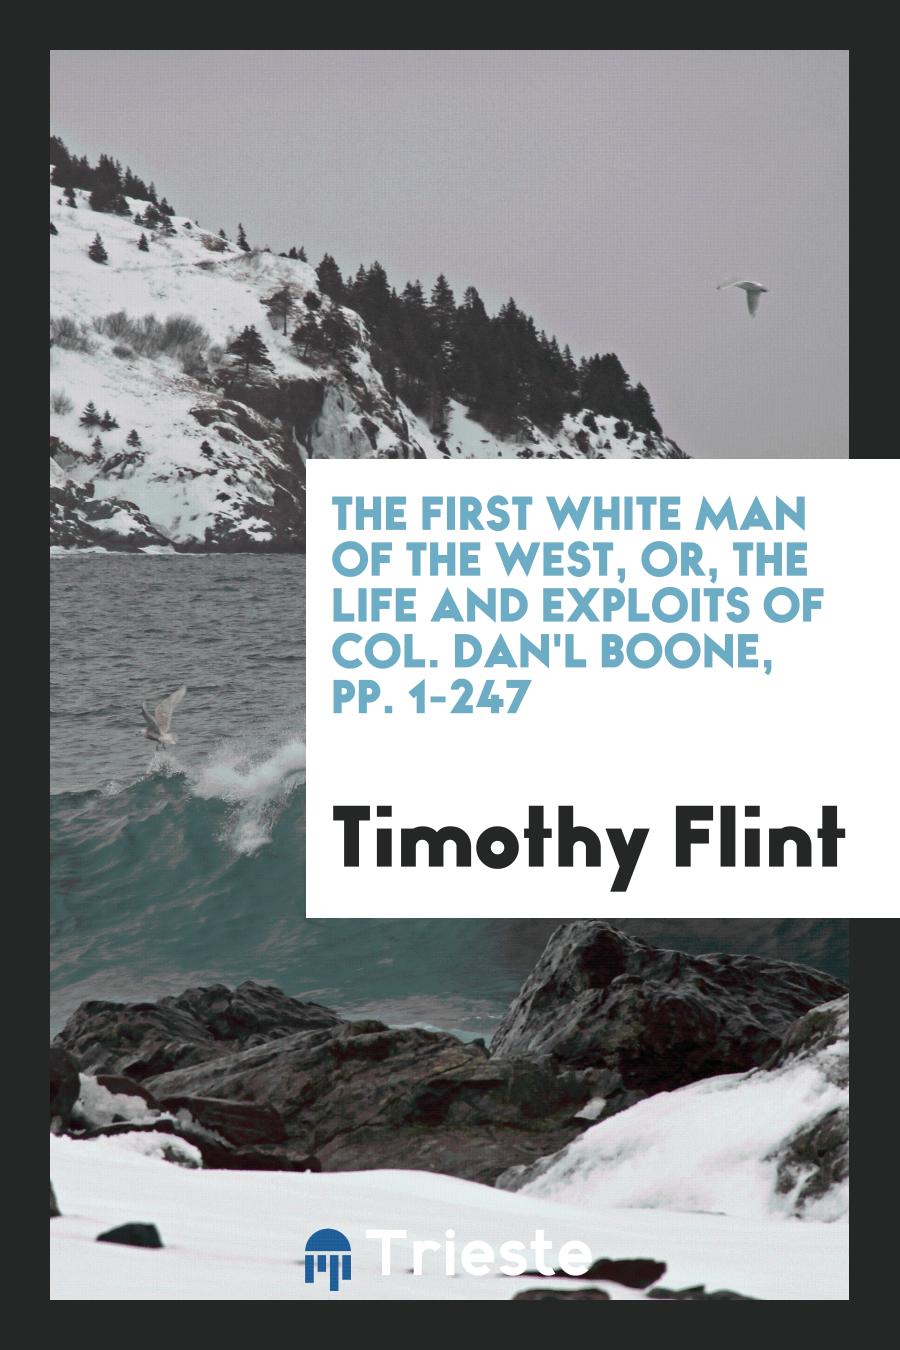 The First White Man of the West, or, The Life and Exploits of Col. Dan'l Boone, pp. 1-247